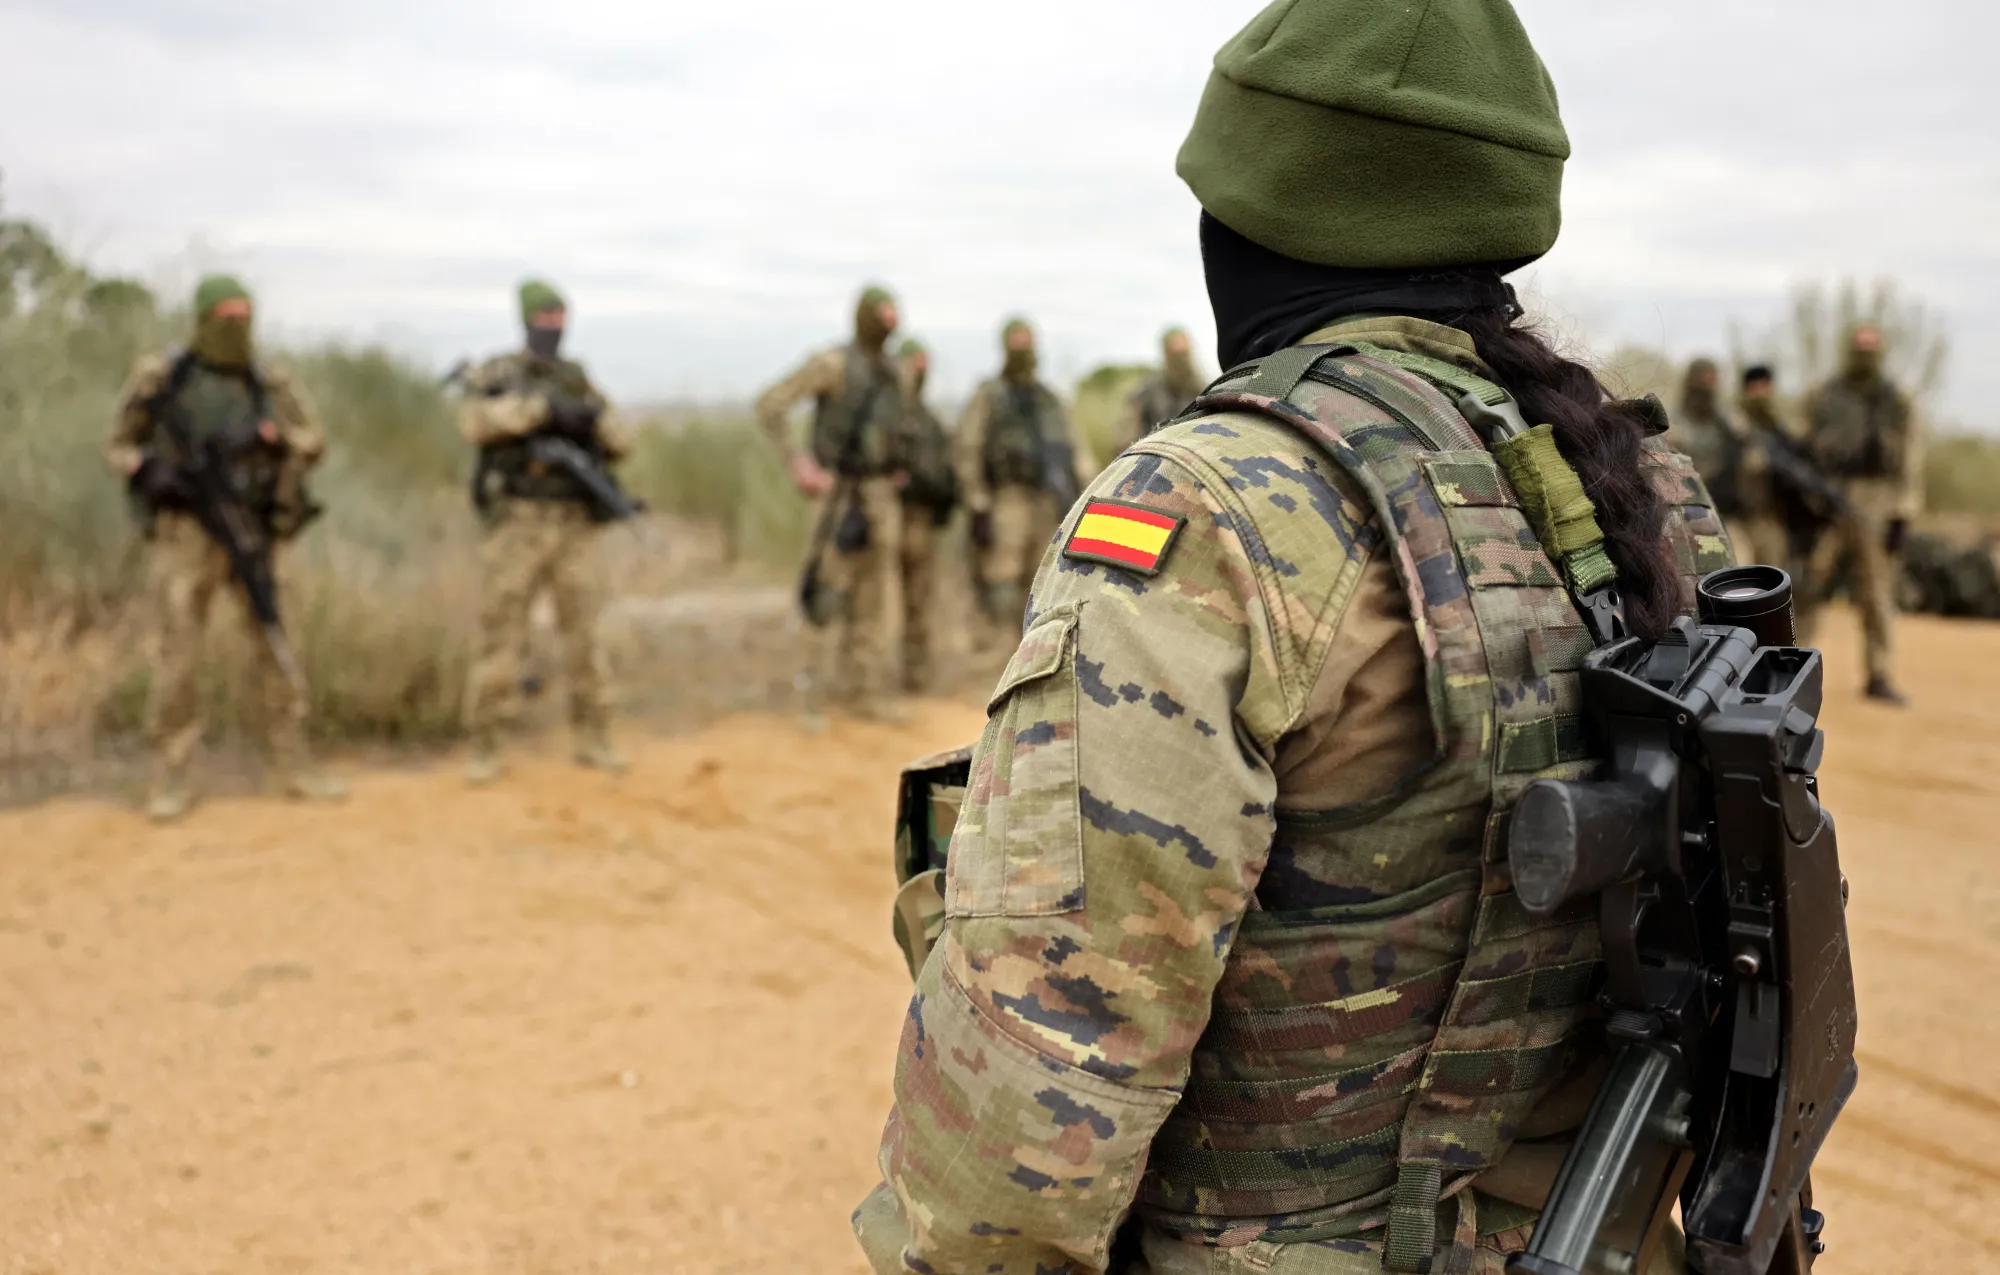 Female Gender Reassignment Among Spanish Soldiers: A Strategy for Increased Benefits and Pay Incentives due to Personal Identity